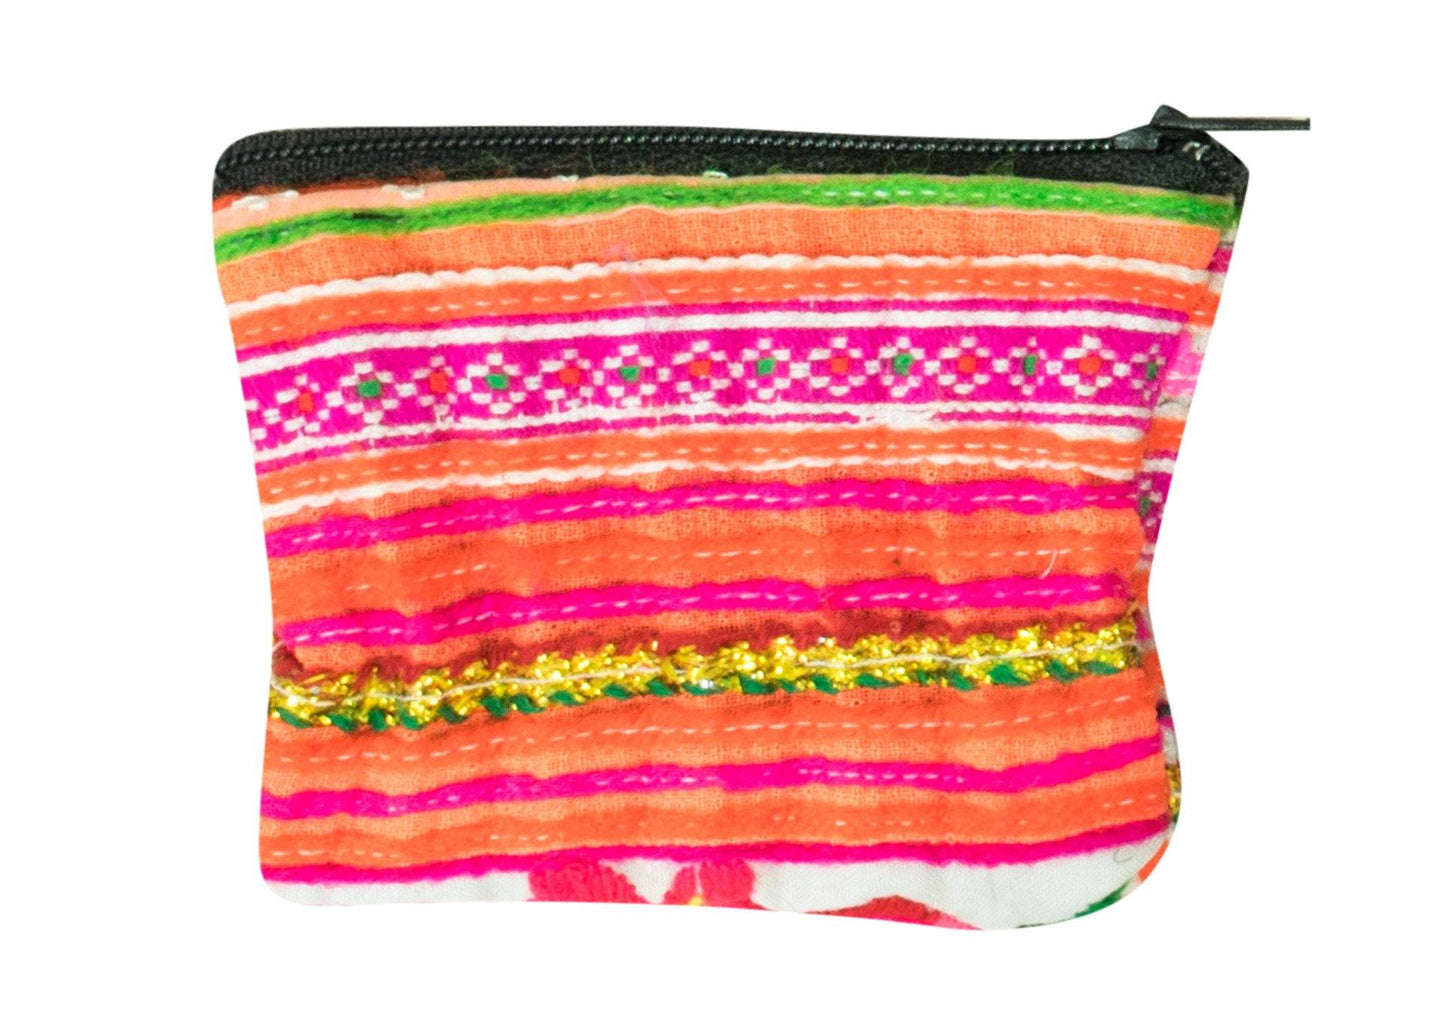 Handmade Hill Tribe Mini COIN Bags - CCCollections